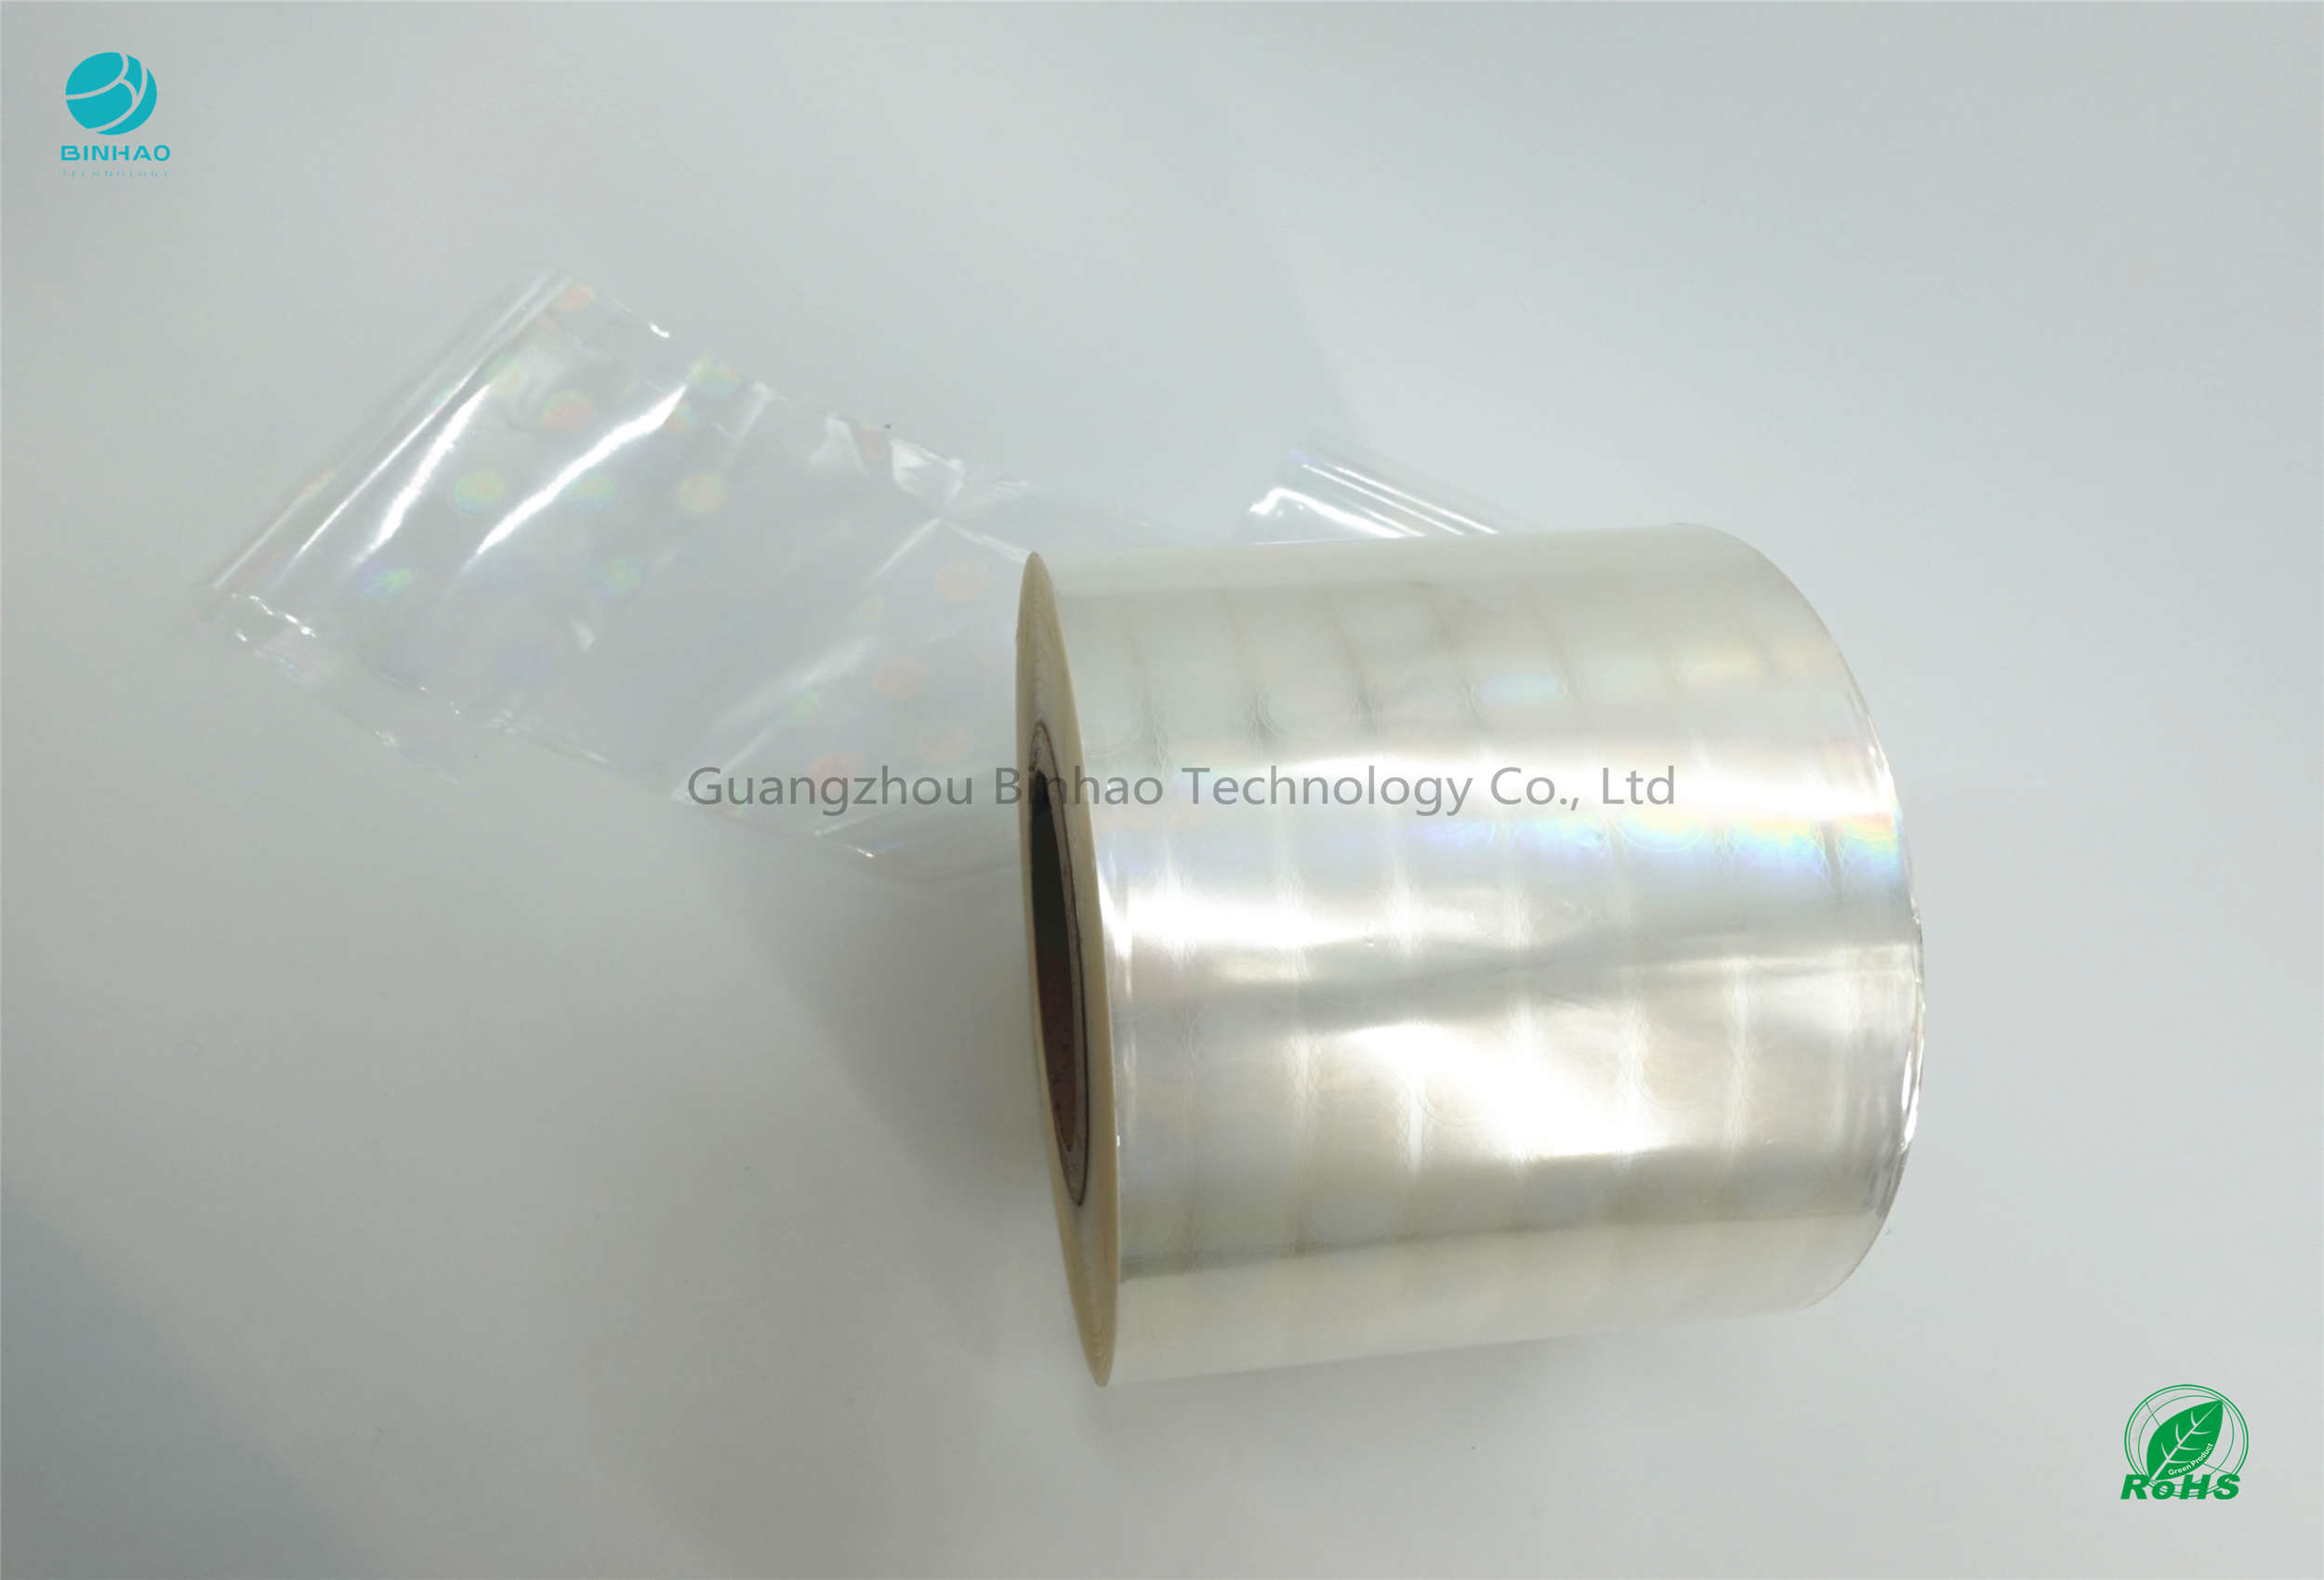 Food Grade BOPP Holographic Film Smooth Surface No Defects Clear Cigarette BOPP Film